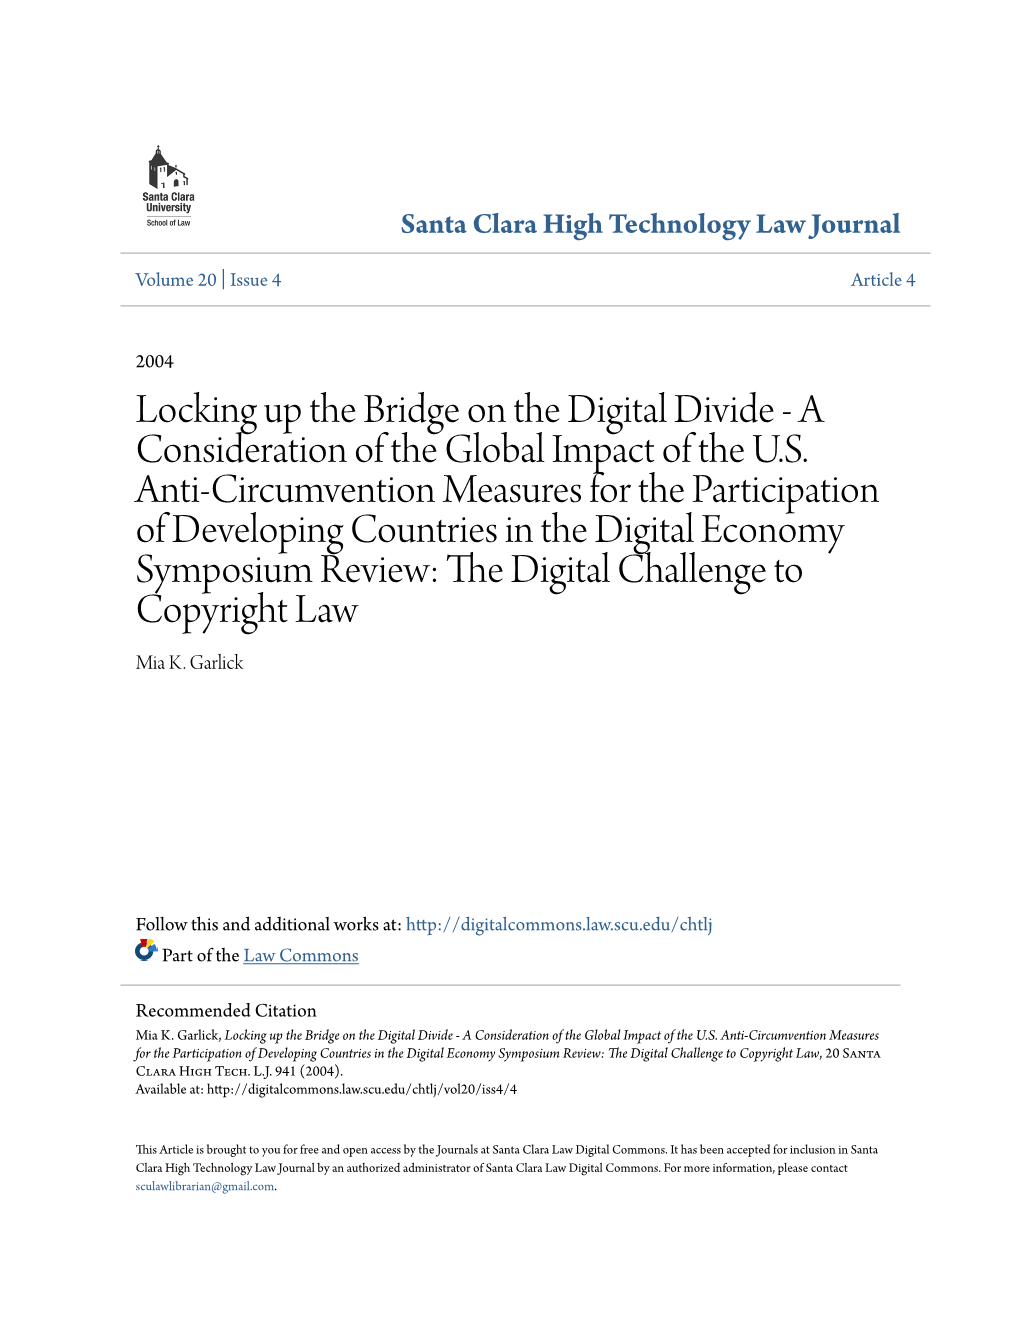 Locking up the Bridge on the Digital Divide - a Consideration of the Global Impact of the U.S